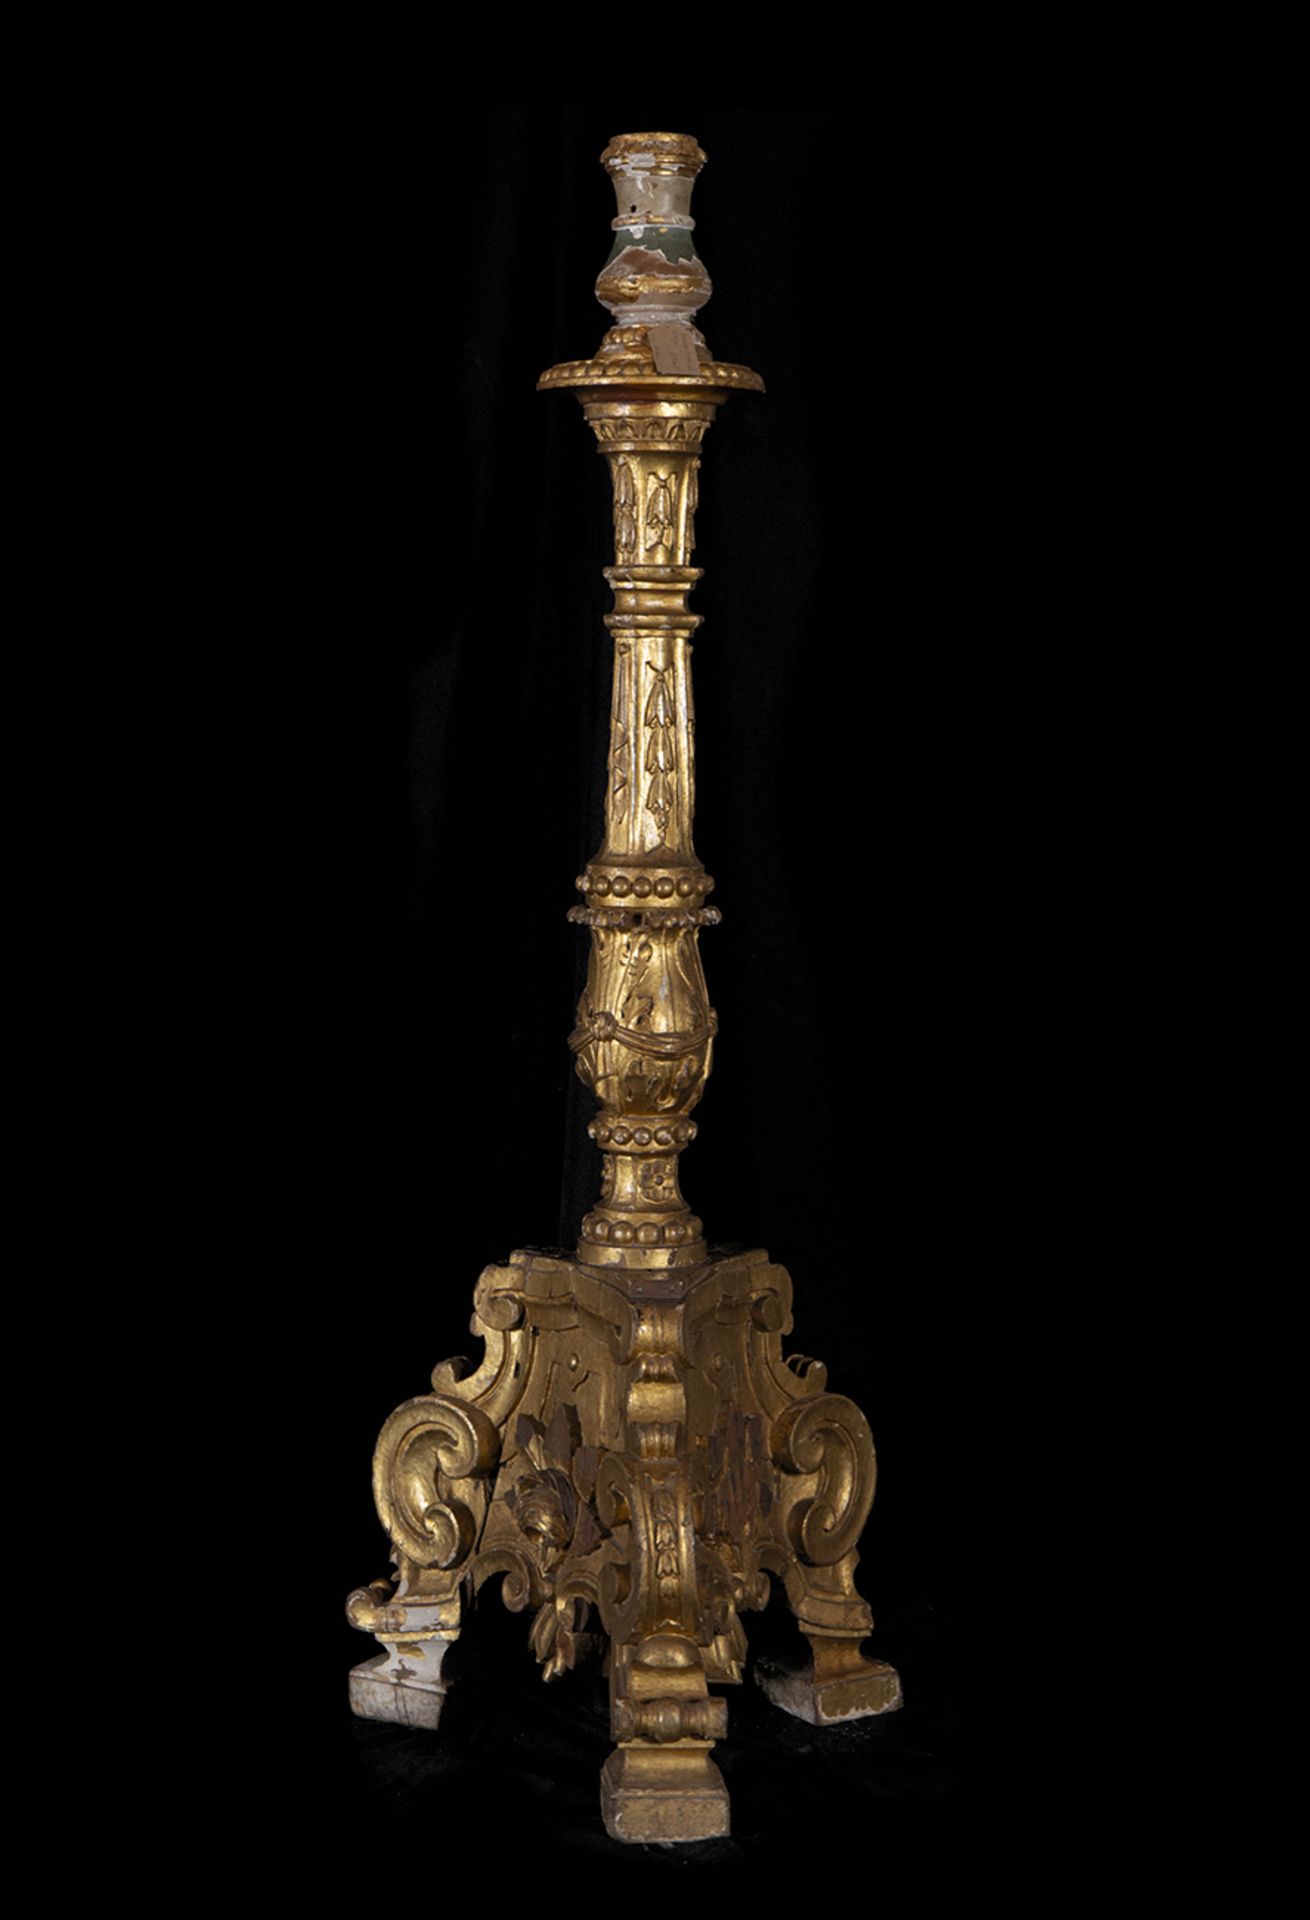 Large Portuguese torch holder in gilded wood, 18th century - Image 5 of 7